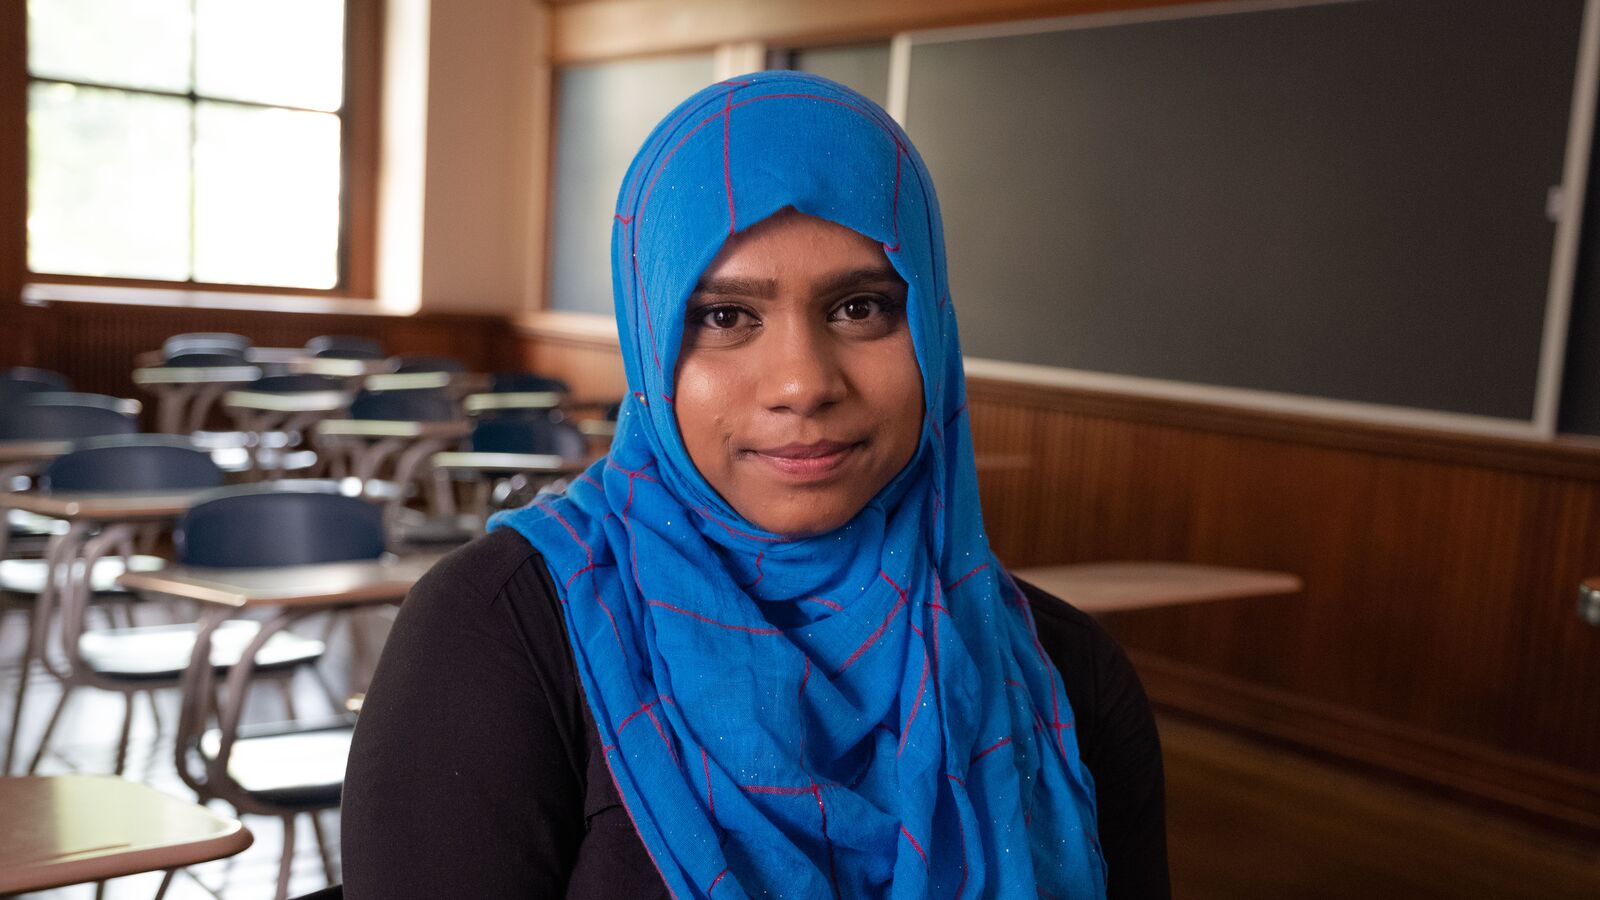 Sultana is just one of the many students who are supported to and through college through iMentor.